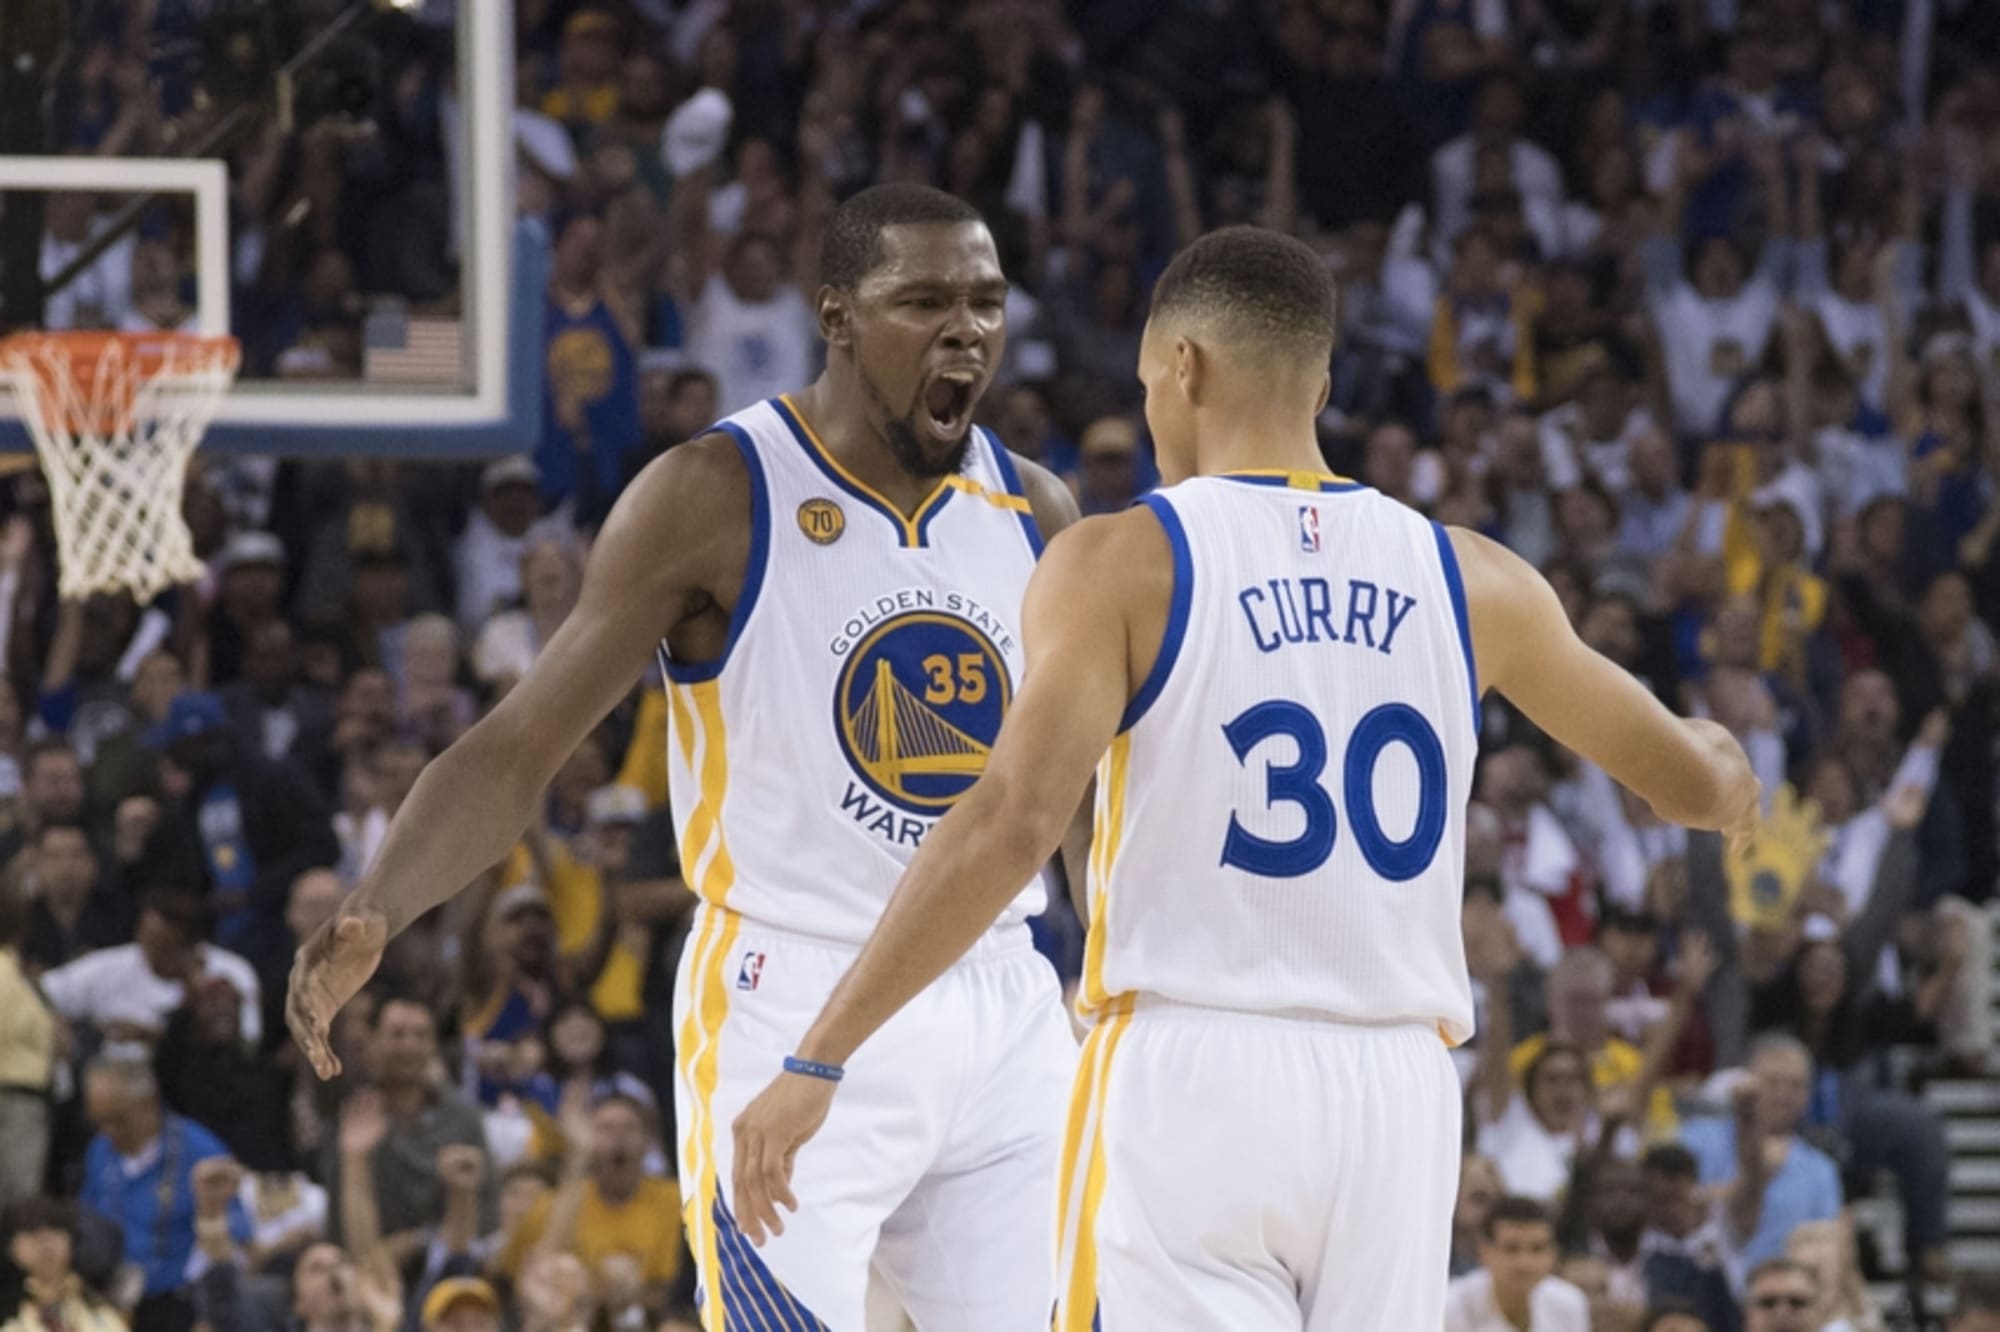 Kevin Durant and Steph Curry torch teams without even touching the ball